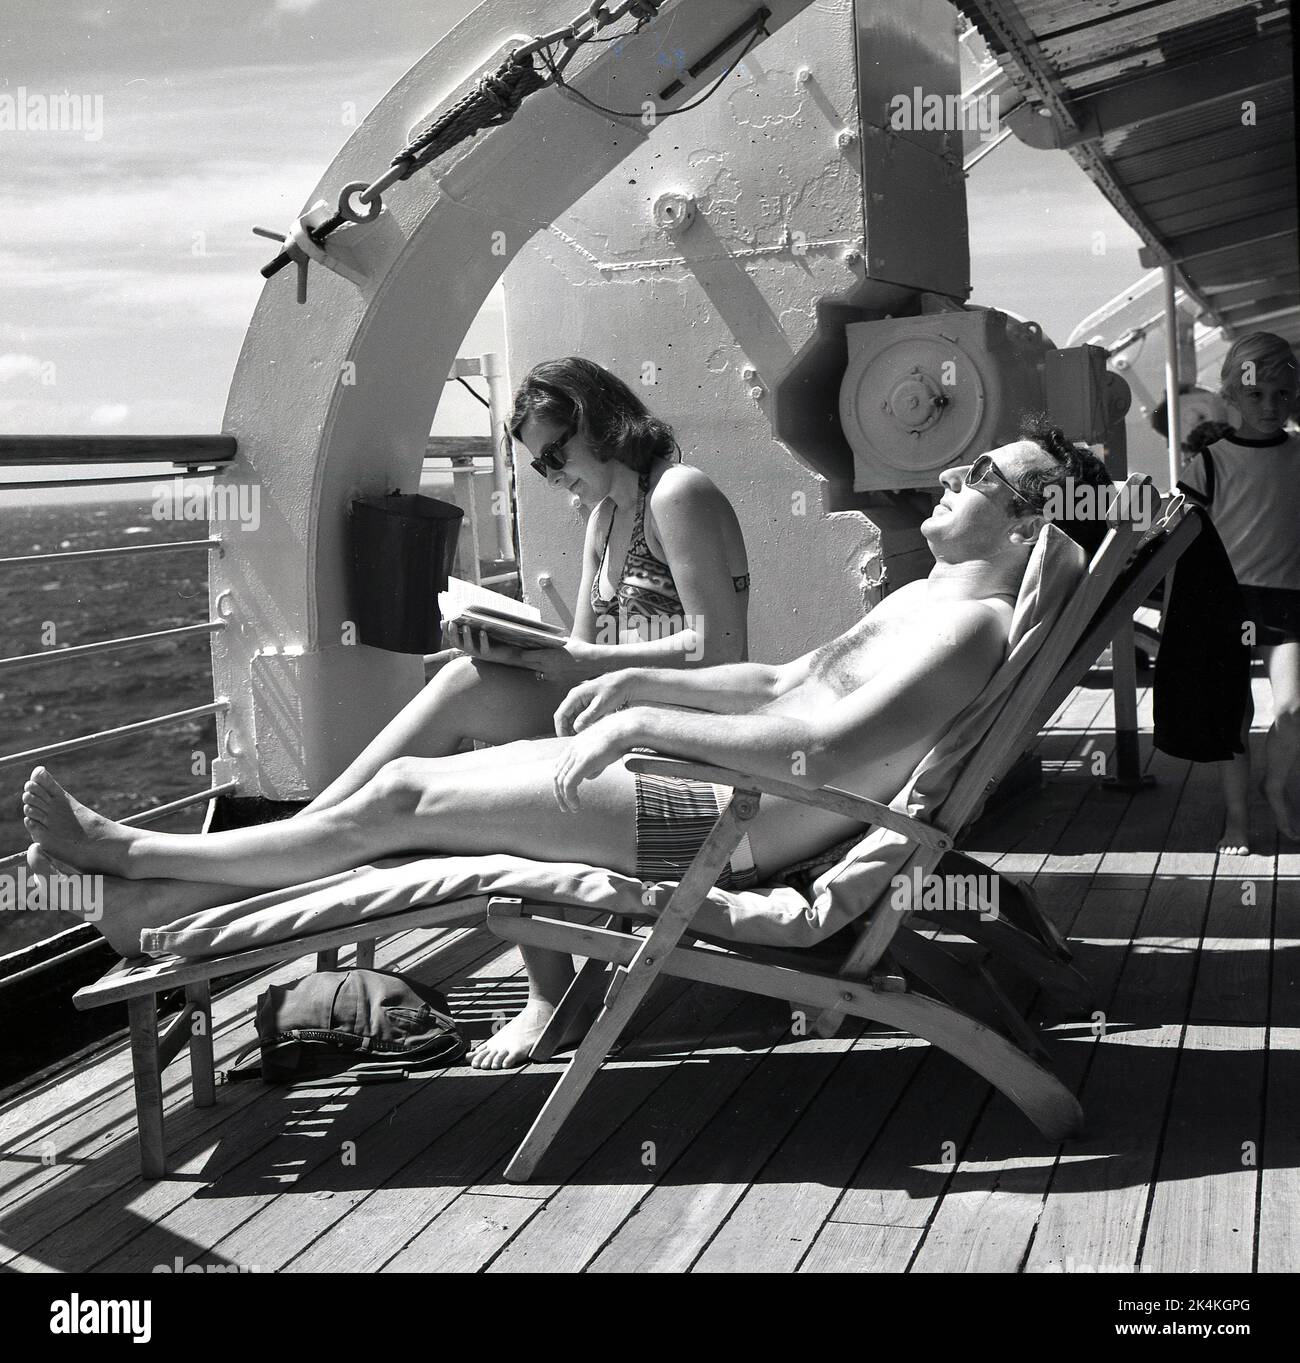 Late 1960s, historical, happy cruising, an adult couple in their bathing suits relaxing in deckchairs on the deck of the Norweigian-America cruise ship, MS Sagafjord. The male passenger is lying getting some sun, while the lady is reading a book. Stock Photo